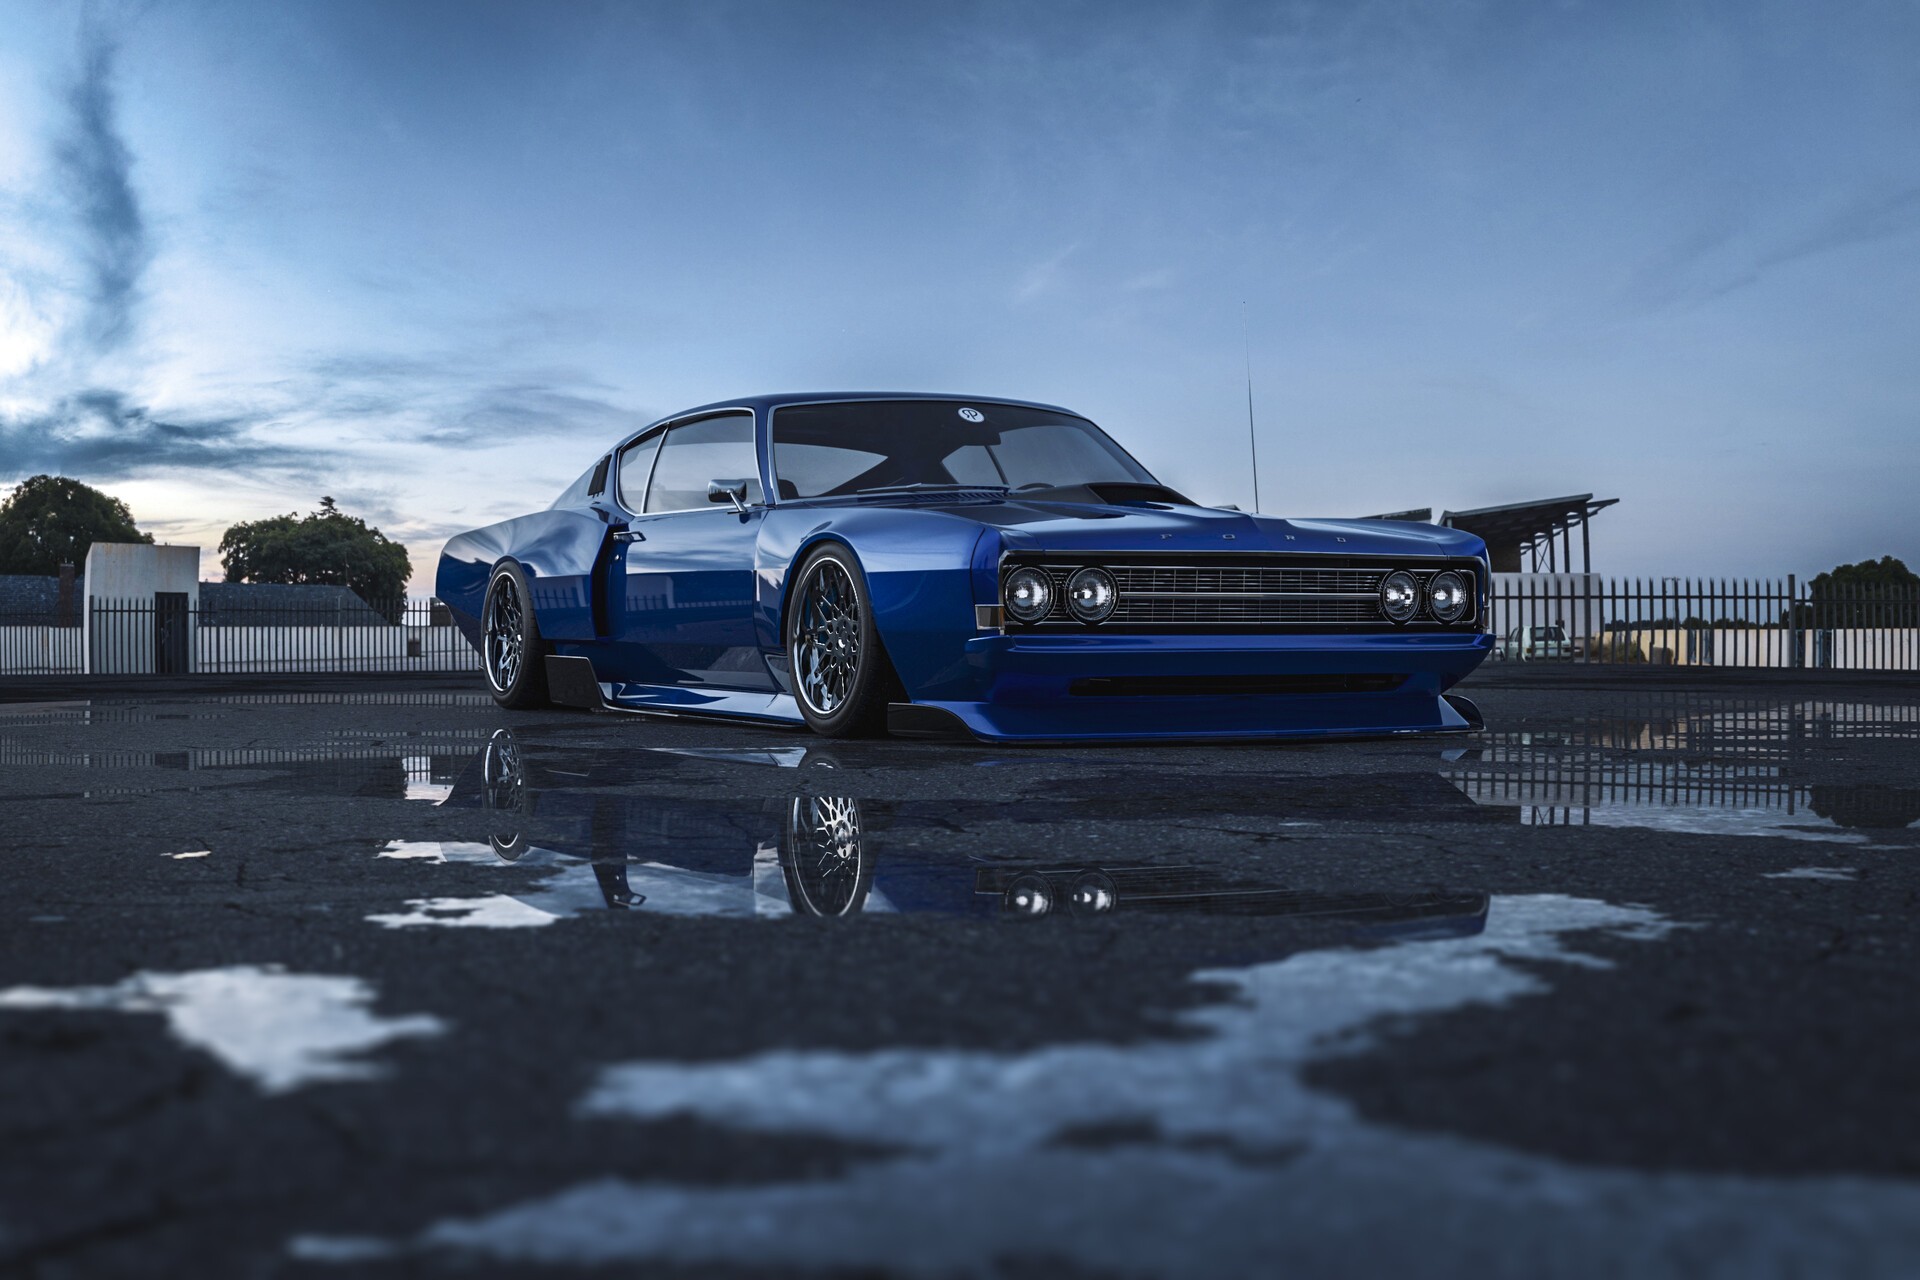 Ford Torino "Cyber Cobra": Forgotten Muscle Car Goes JDM in Widebody